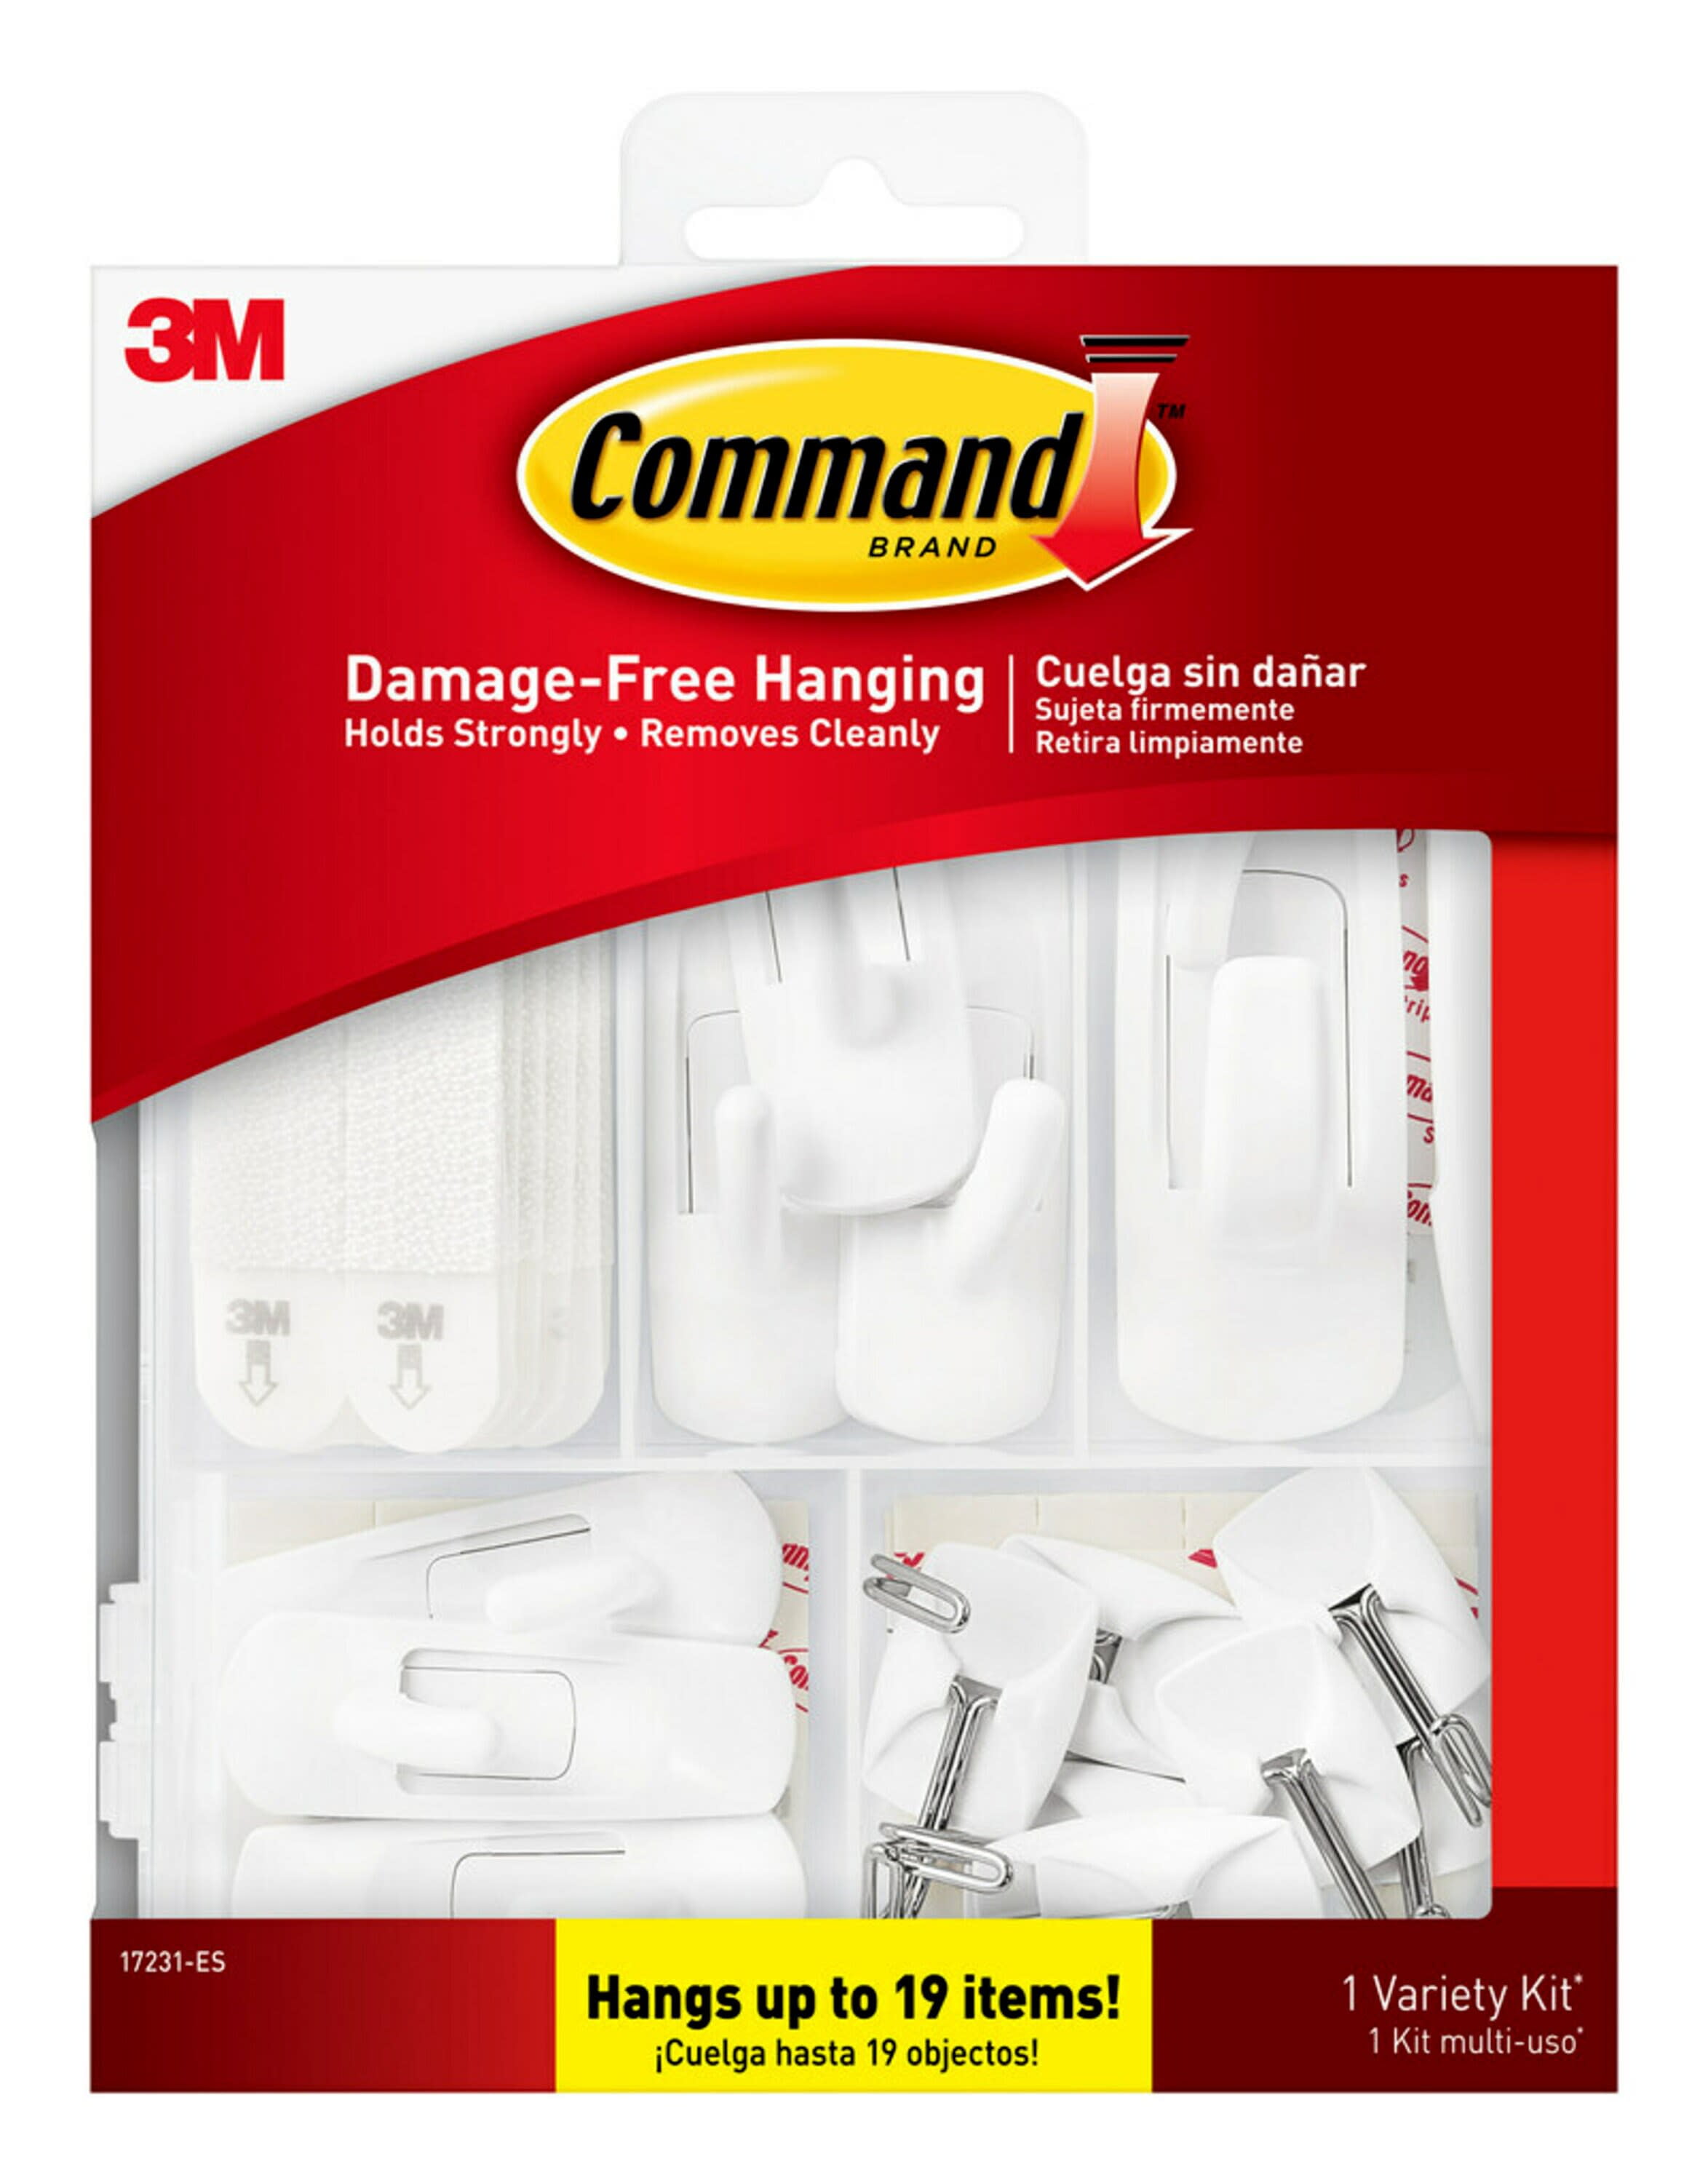 Command 3M Picture Hanging Strips Value Pack - Shop Hooks